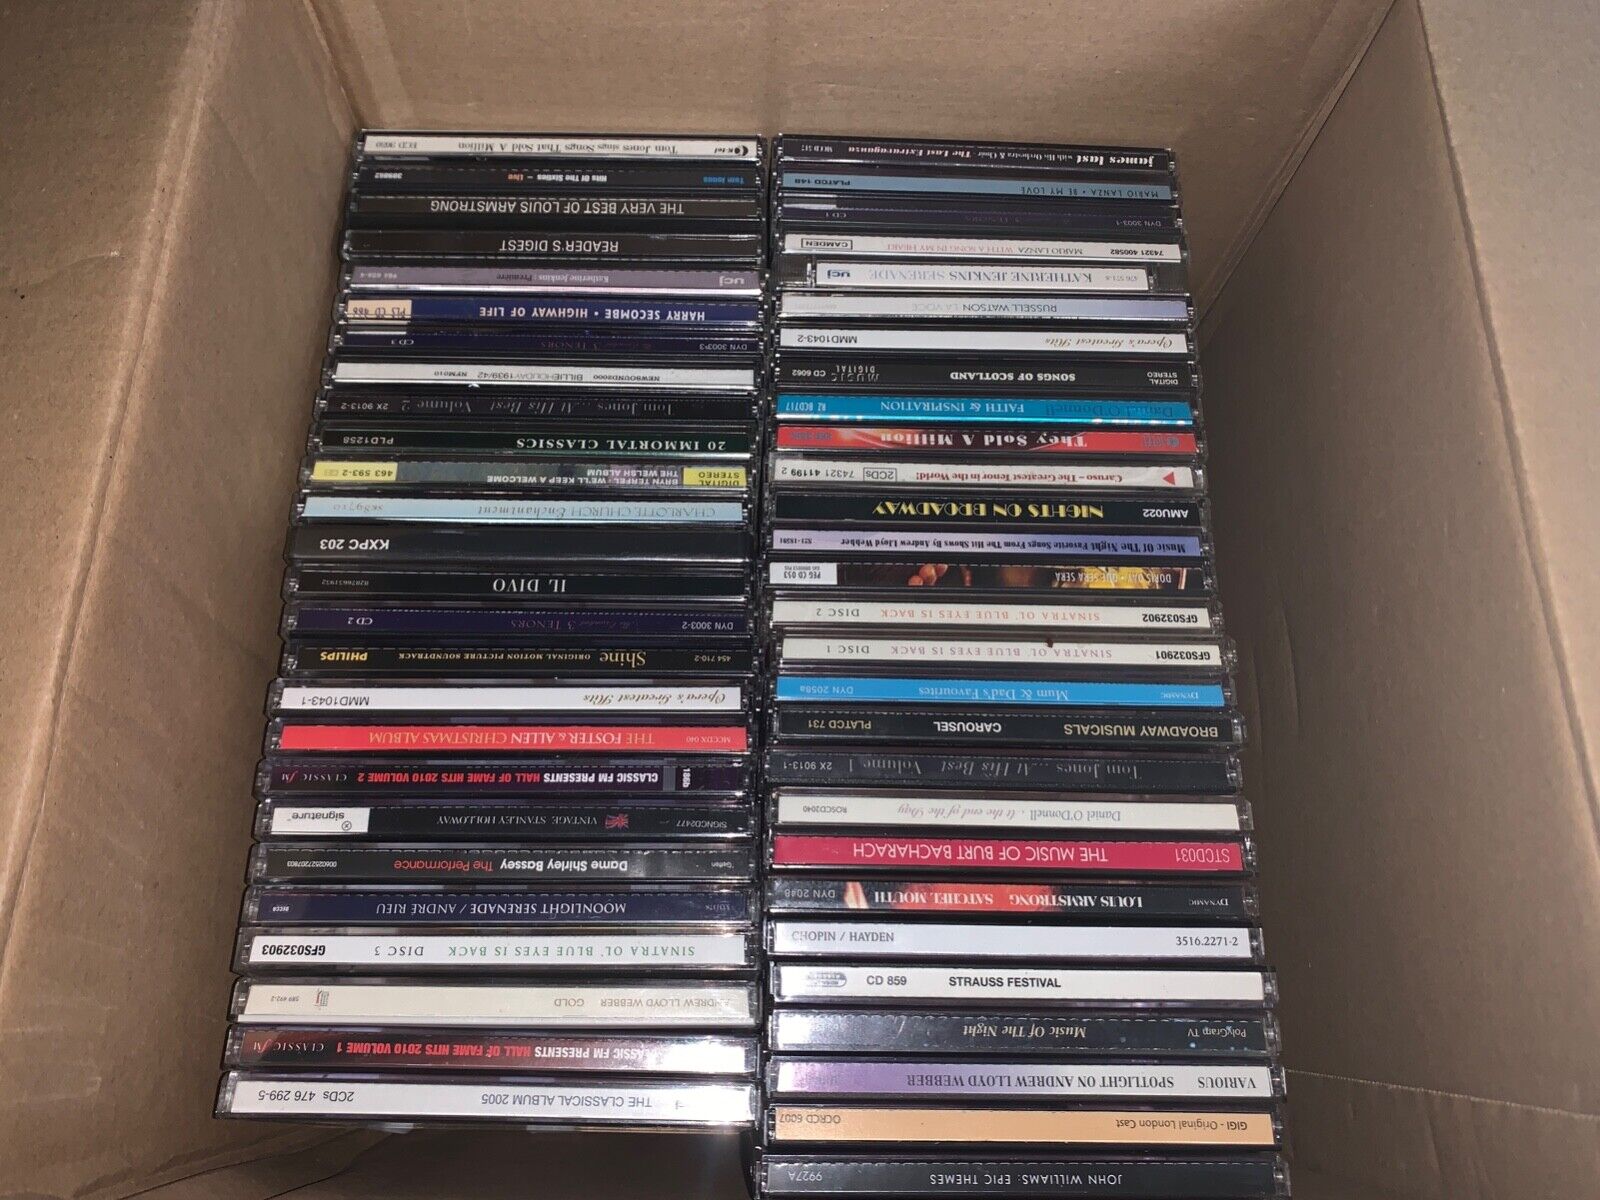 Collection of cds - Musicals, Pop, Opera, Jazz,  Classical etc